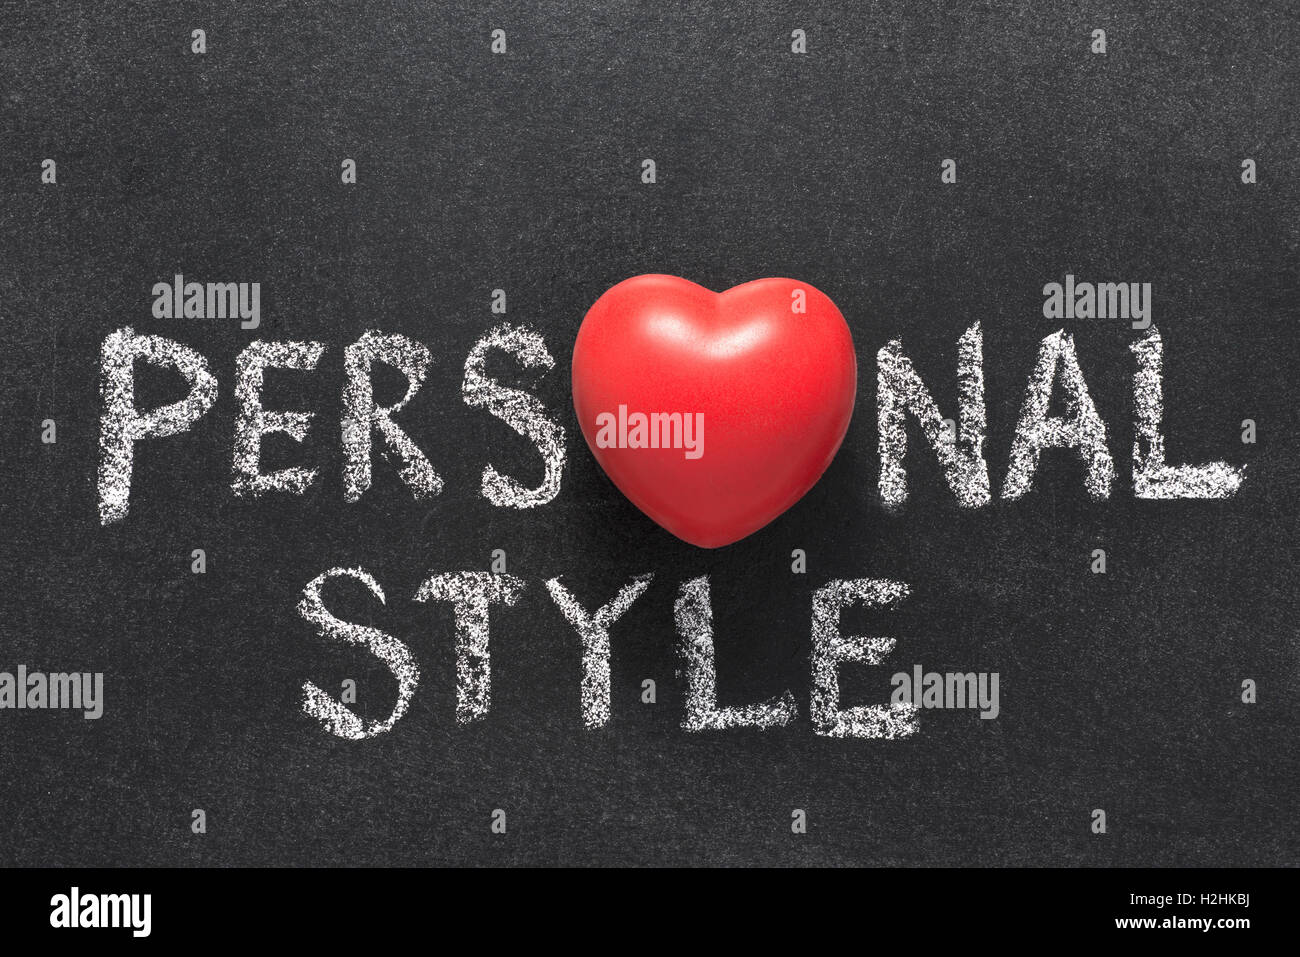 personal style phrase handwritten on blackboard with heart symbol instead of O Stock Photo